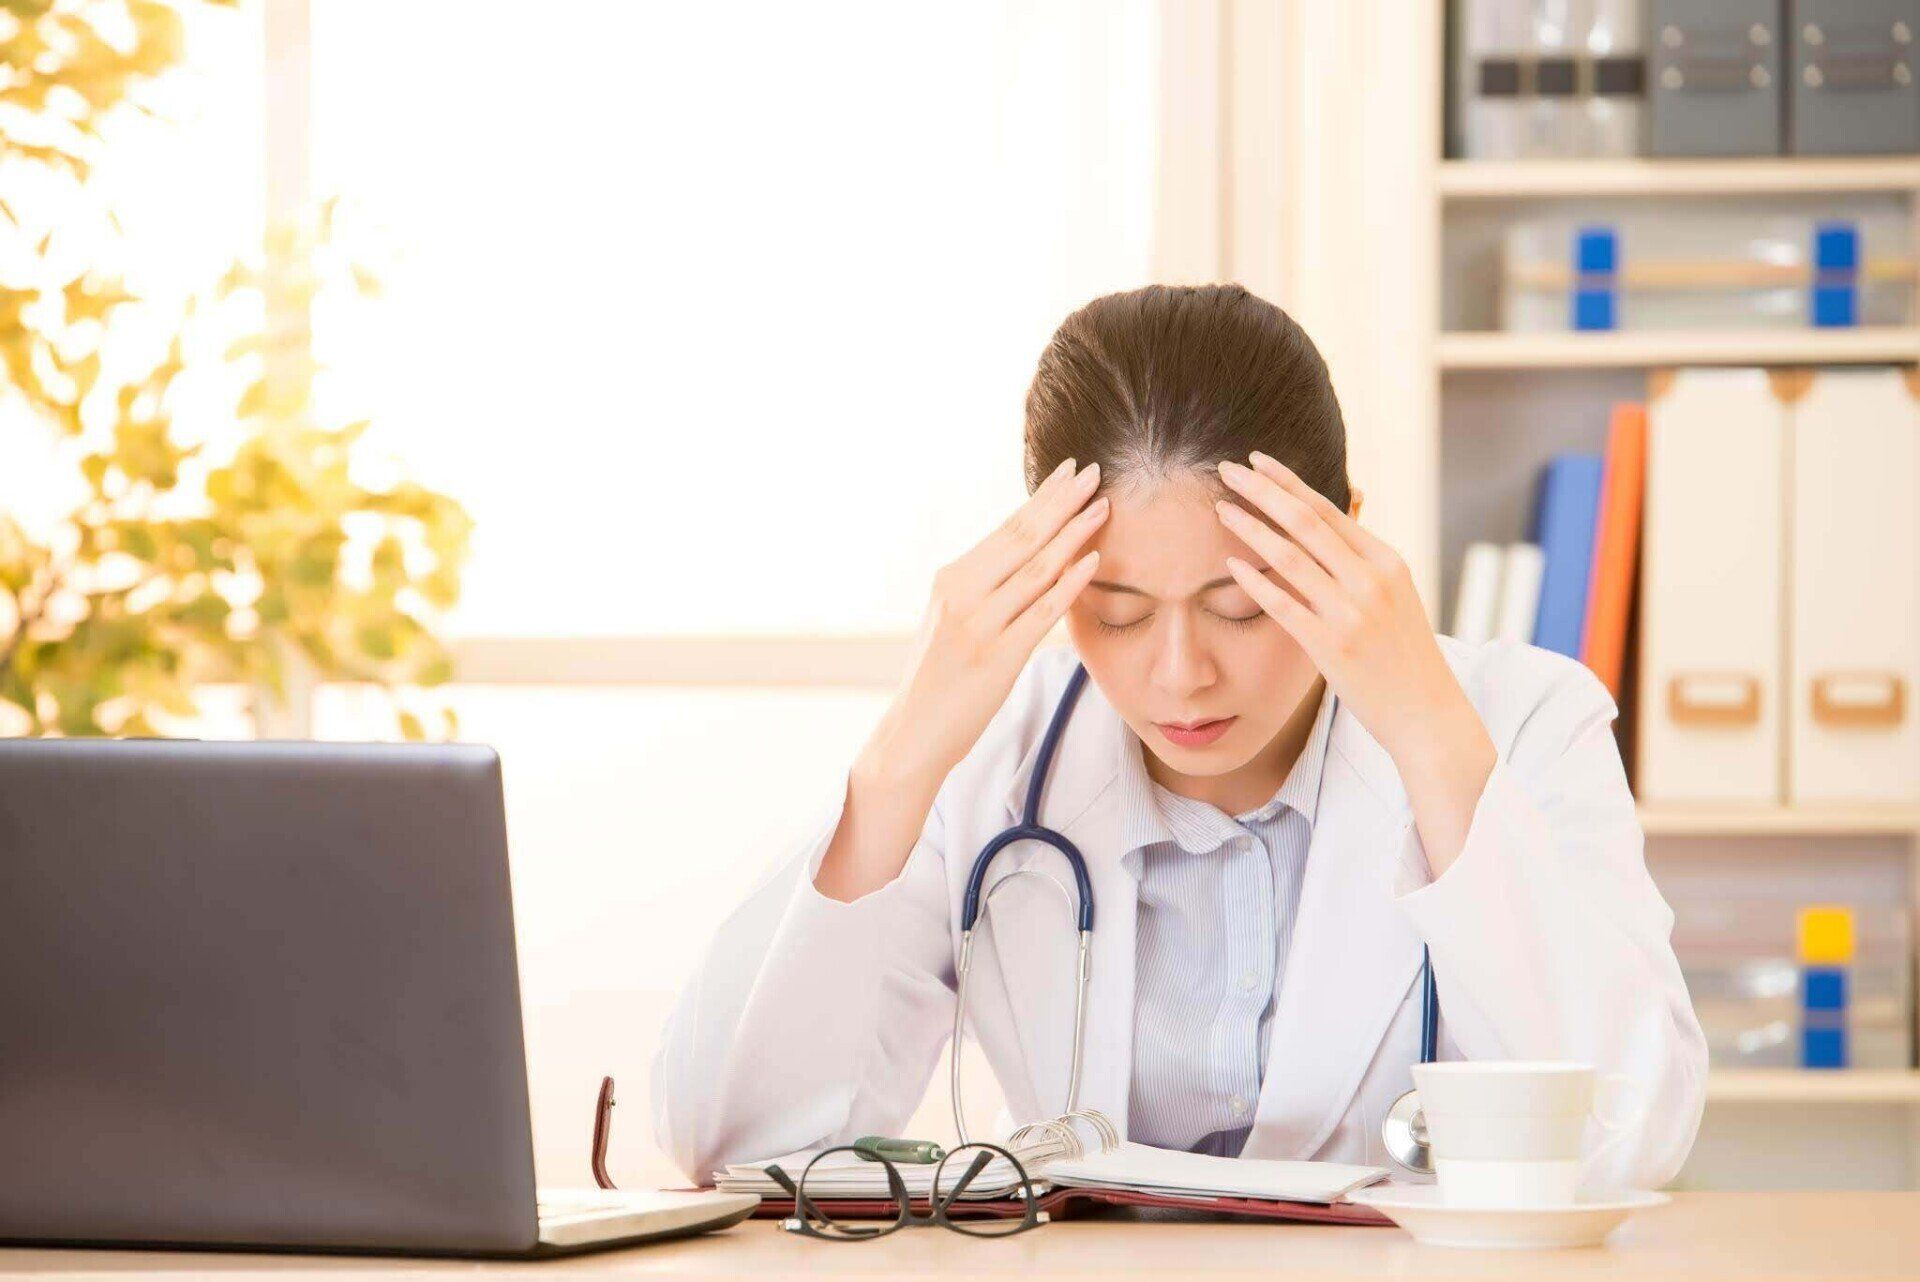 signs of physician burnout